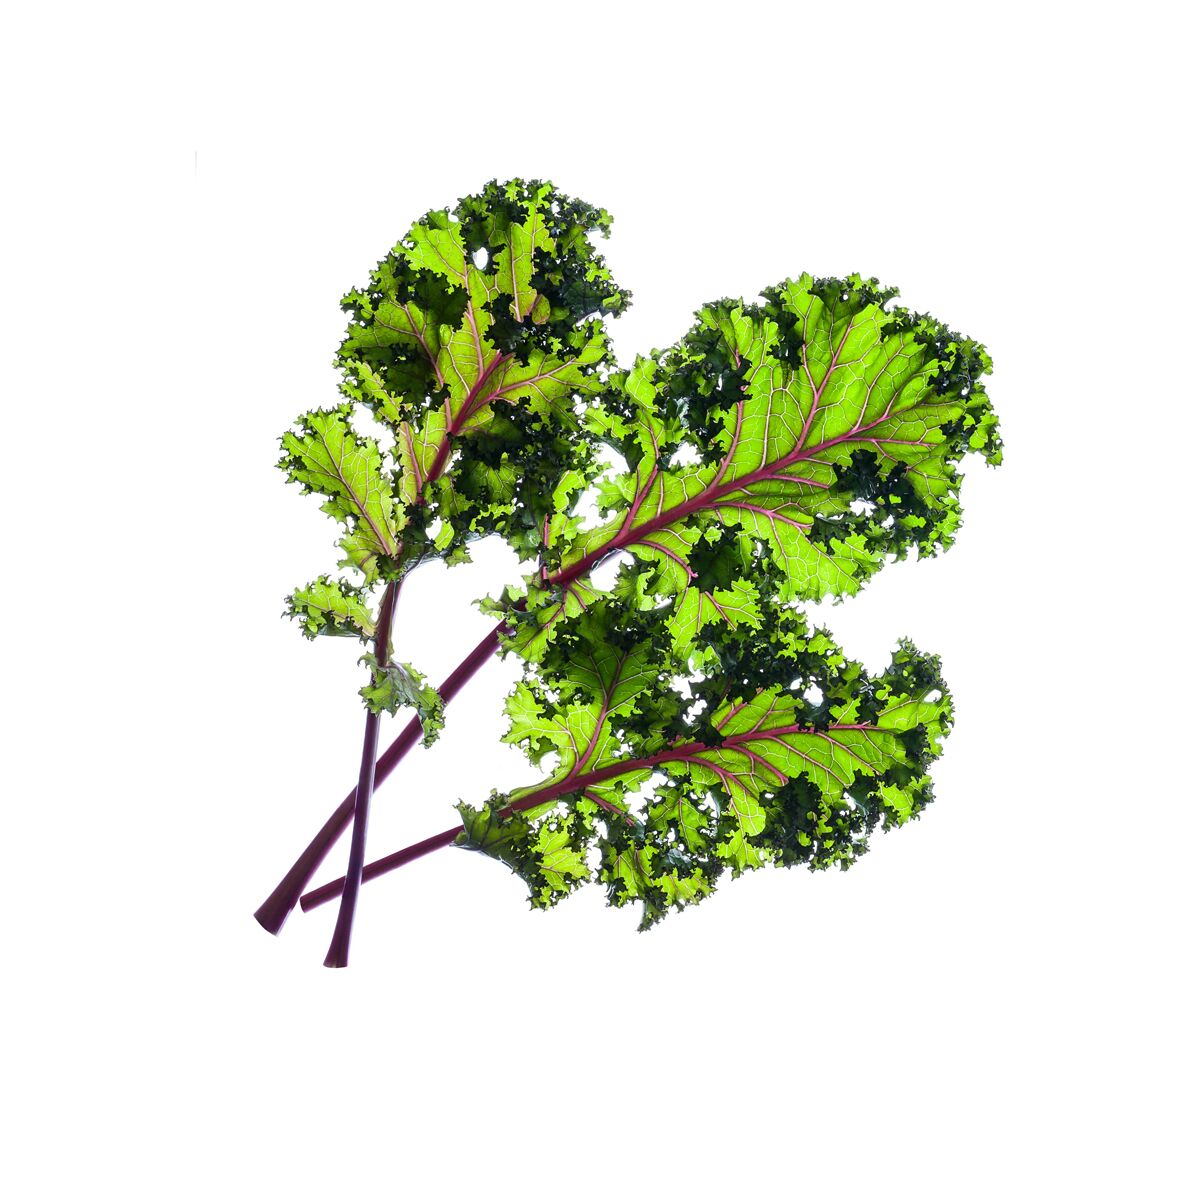 Red_Kale_plant_1200x1200_preview.jpg